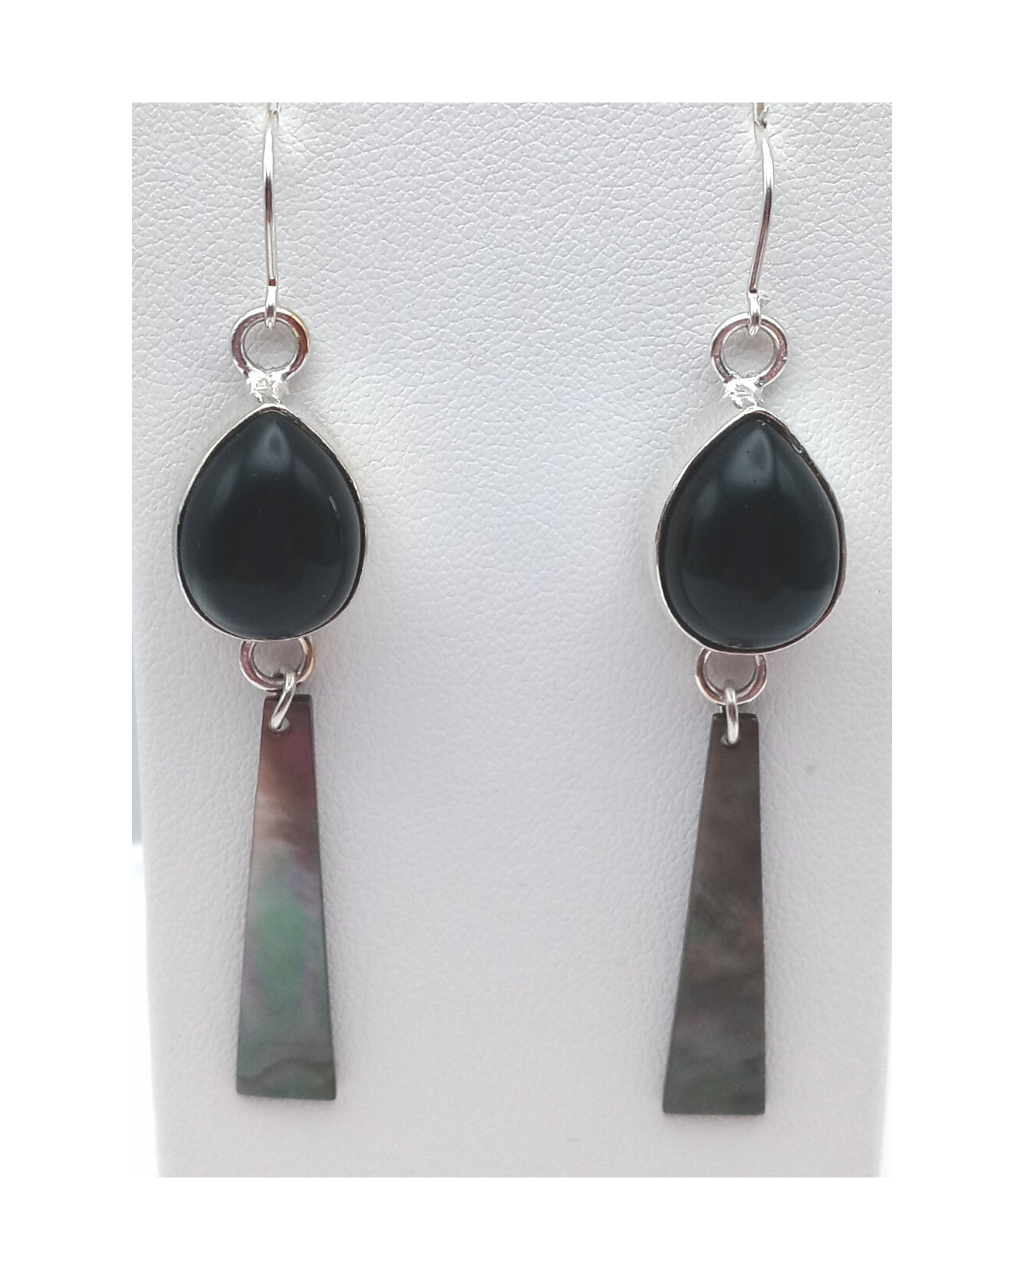 Sterling Teardrop Black Onyx and Beautiful Black Mother-of-Pearl Shell Earrings 2 11/16"L X 1/2"W. ONE ONLY